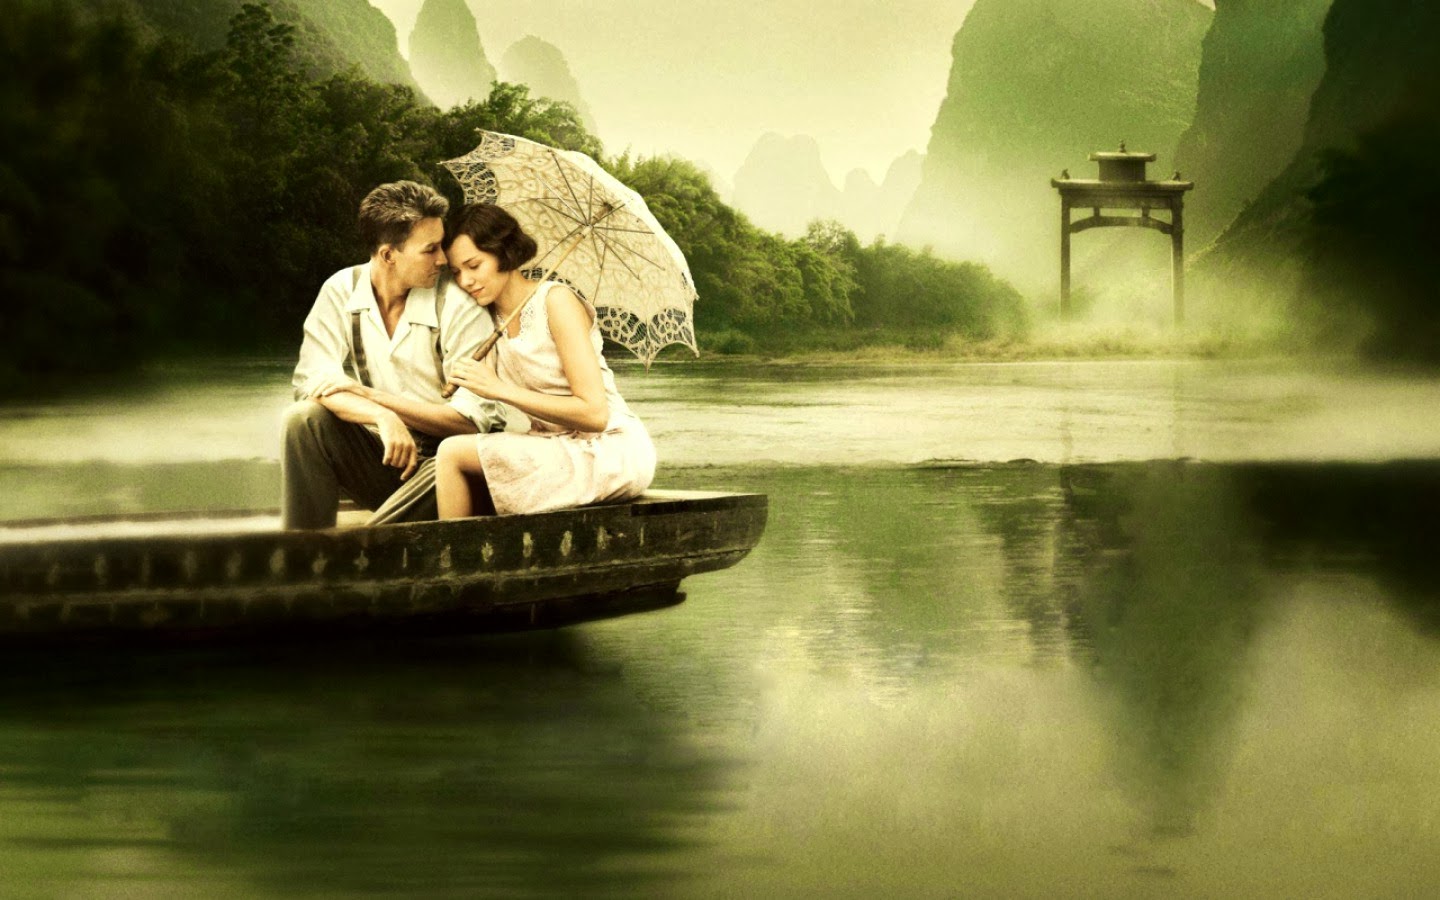 So HERE we are providing HD Wallpapers and Images of Romantic Couple